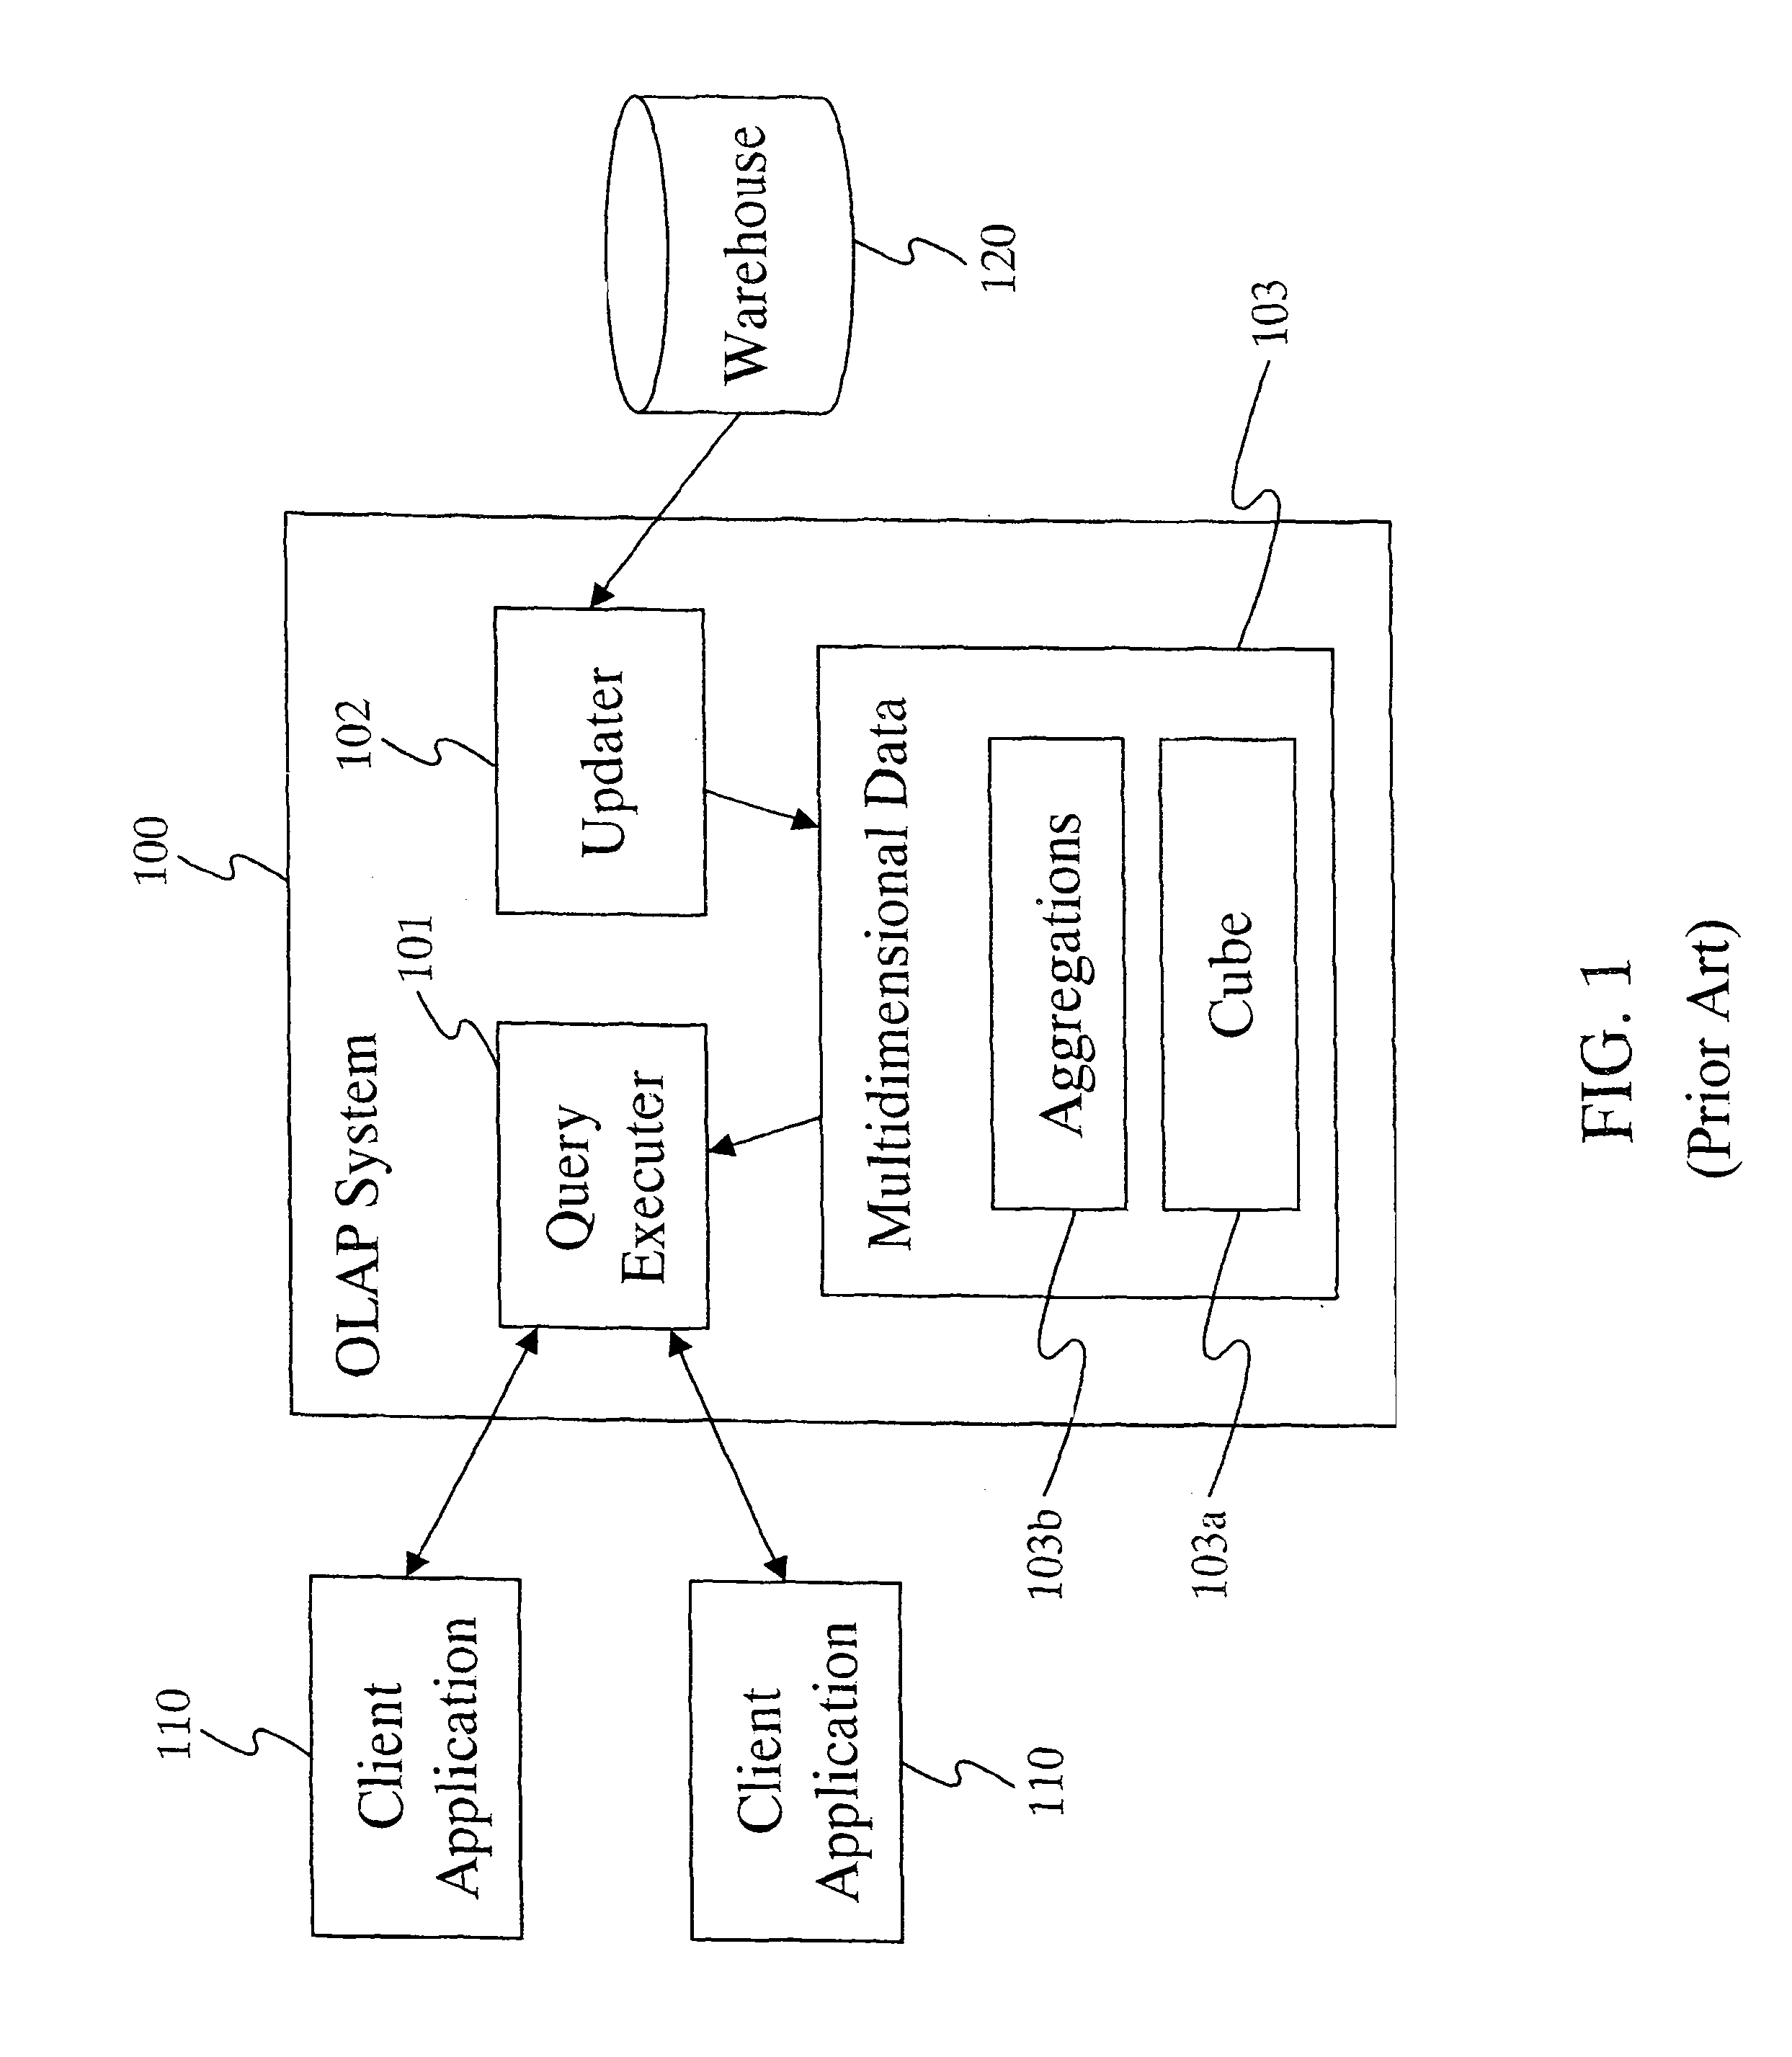 Use of primary and secondary indexes to facilitate aggregation of records of an OLAP data cube